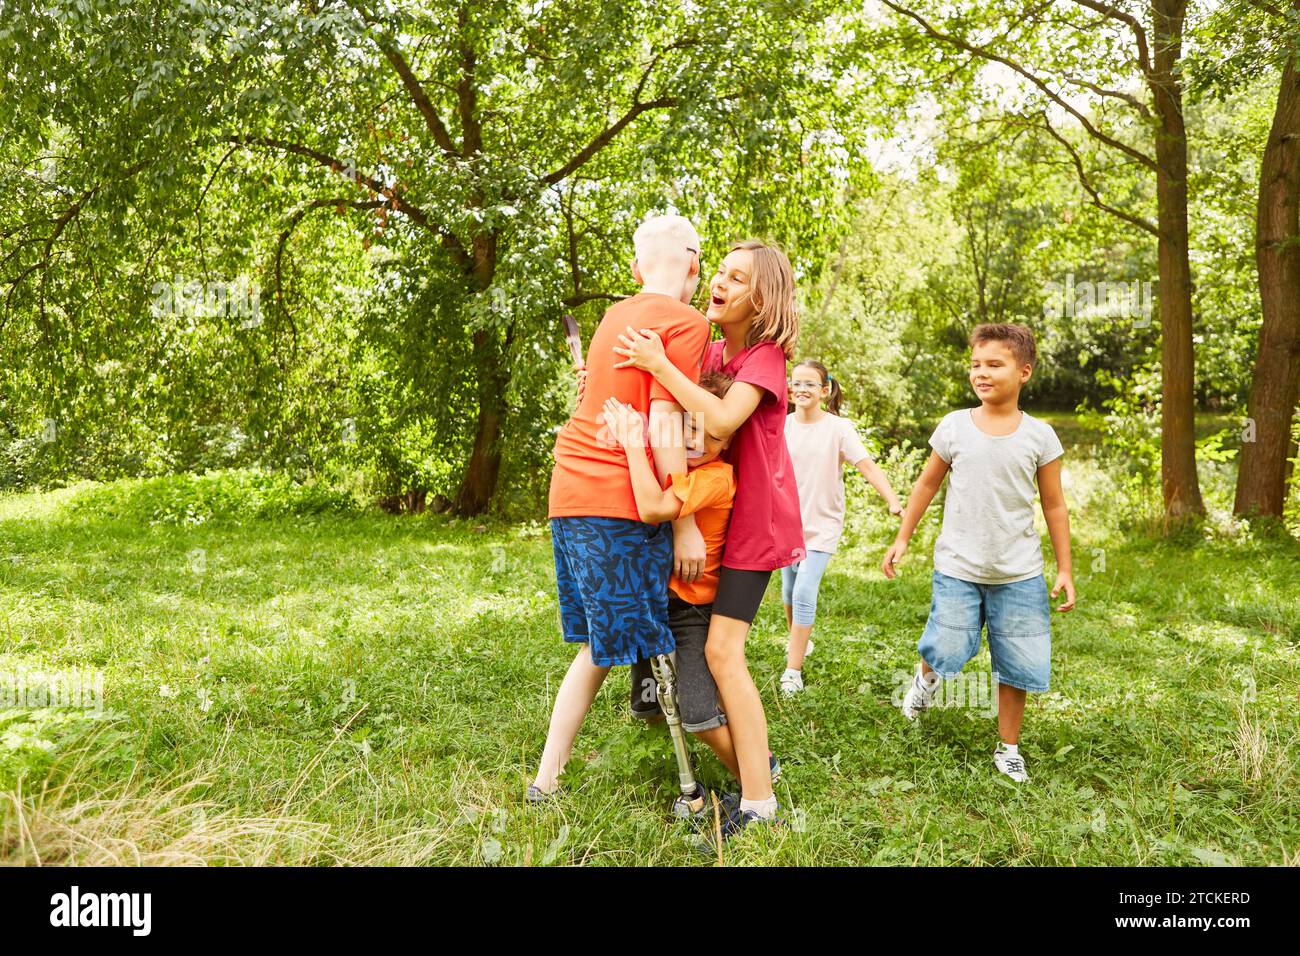 Happy children embracing disabled male friend standing at park Stock Photo